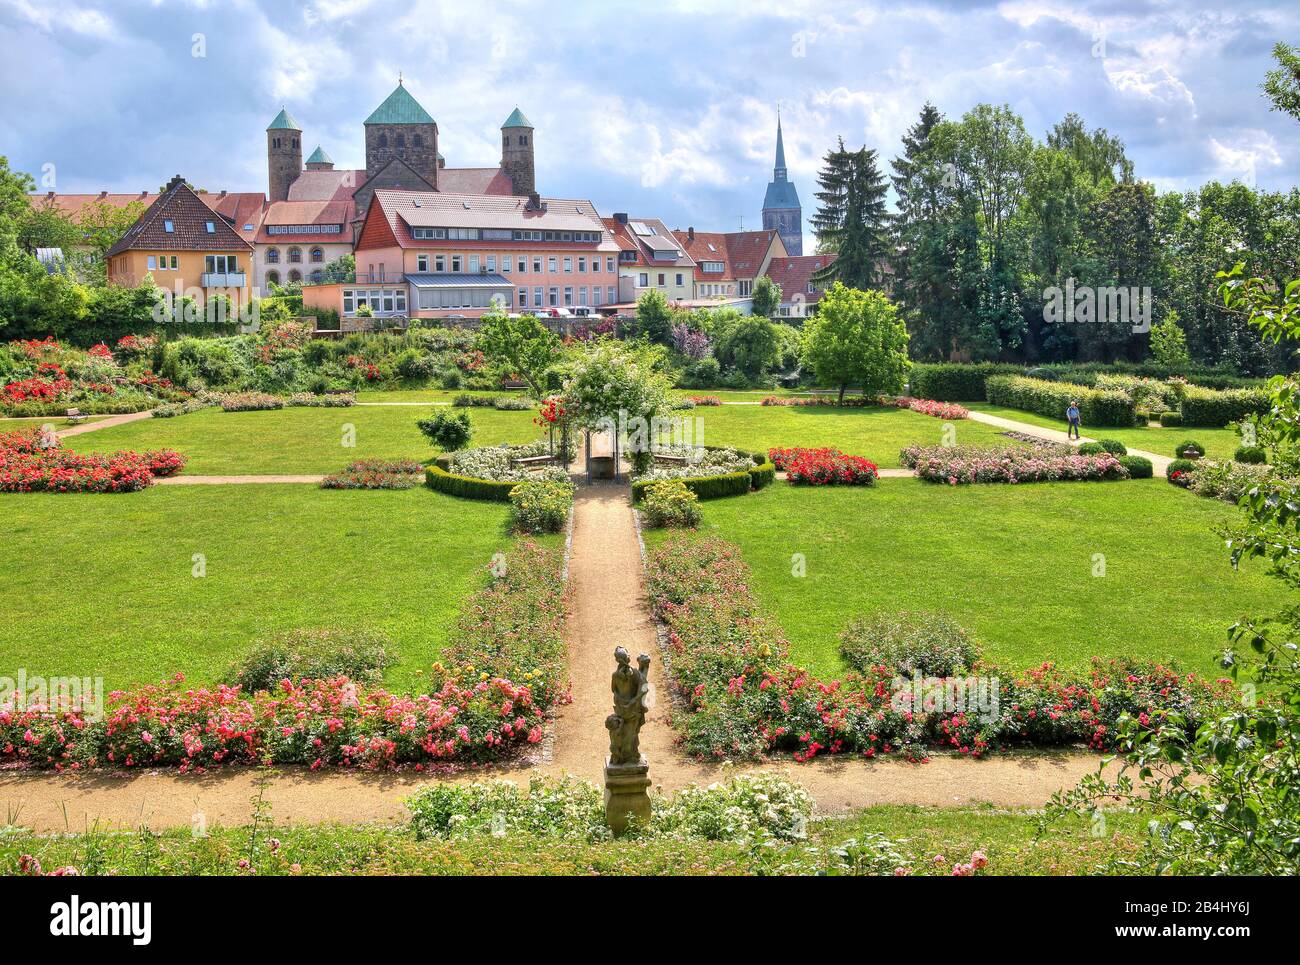 Magdalenengarten with the towers of the churches St. Michael and St. Andreas, Hildesheim, Lower Saxony, Germany Stock Photo